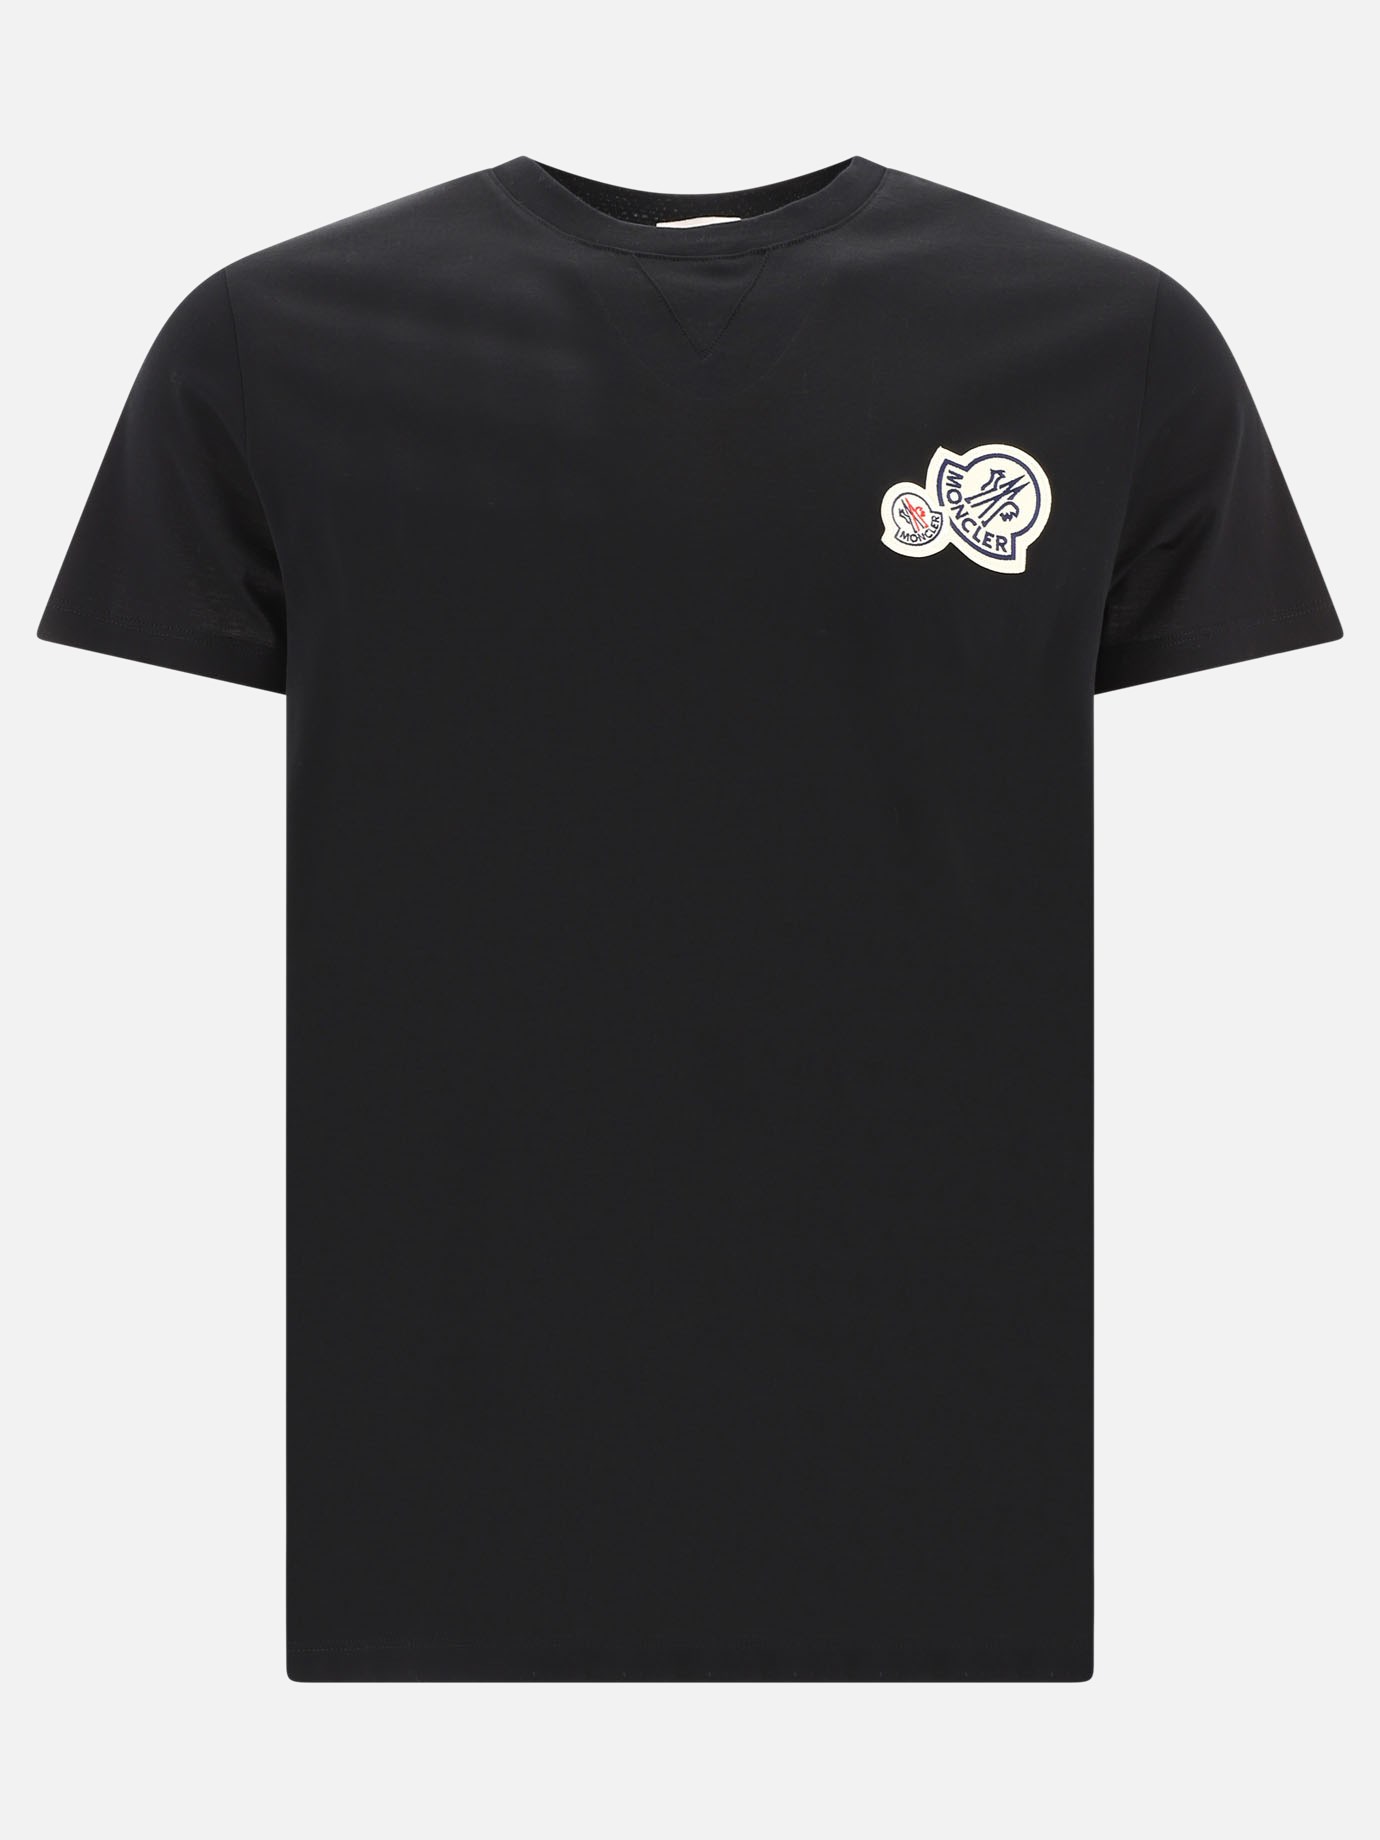  Double Logo  t-shirt by Moncler